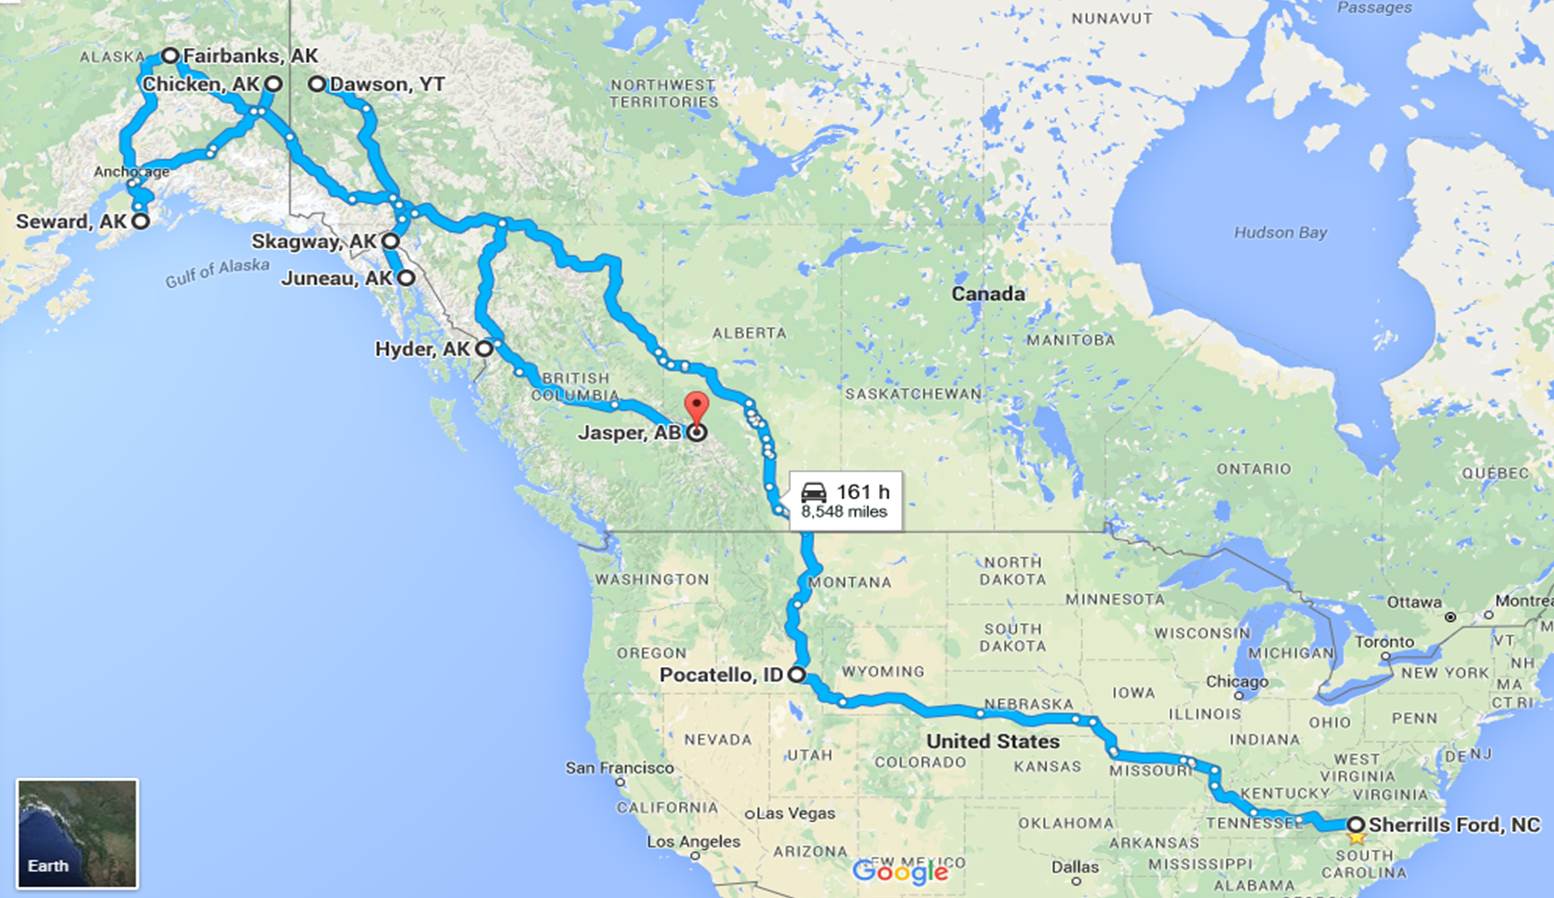 The Route to Alaska